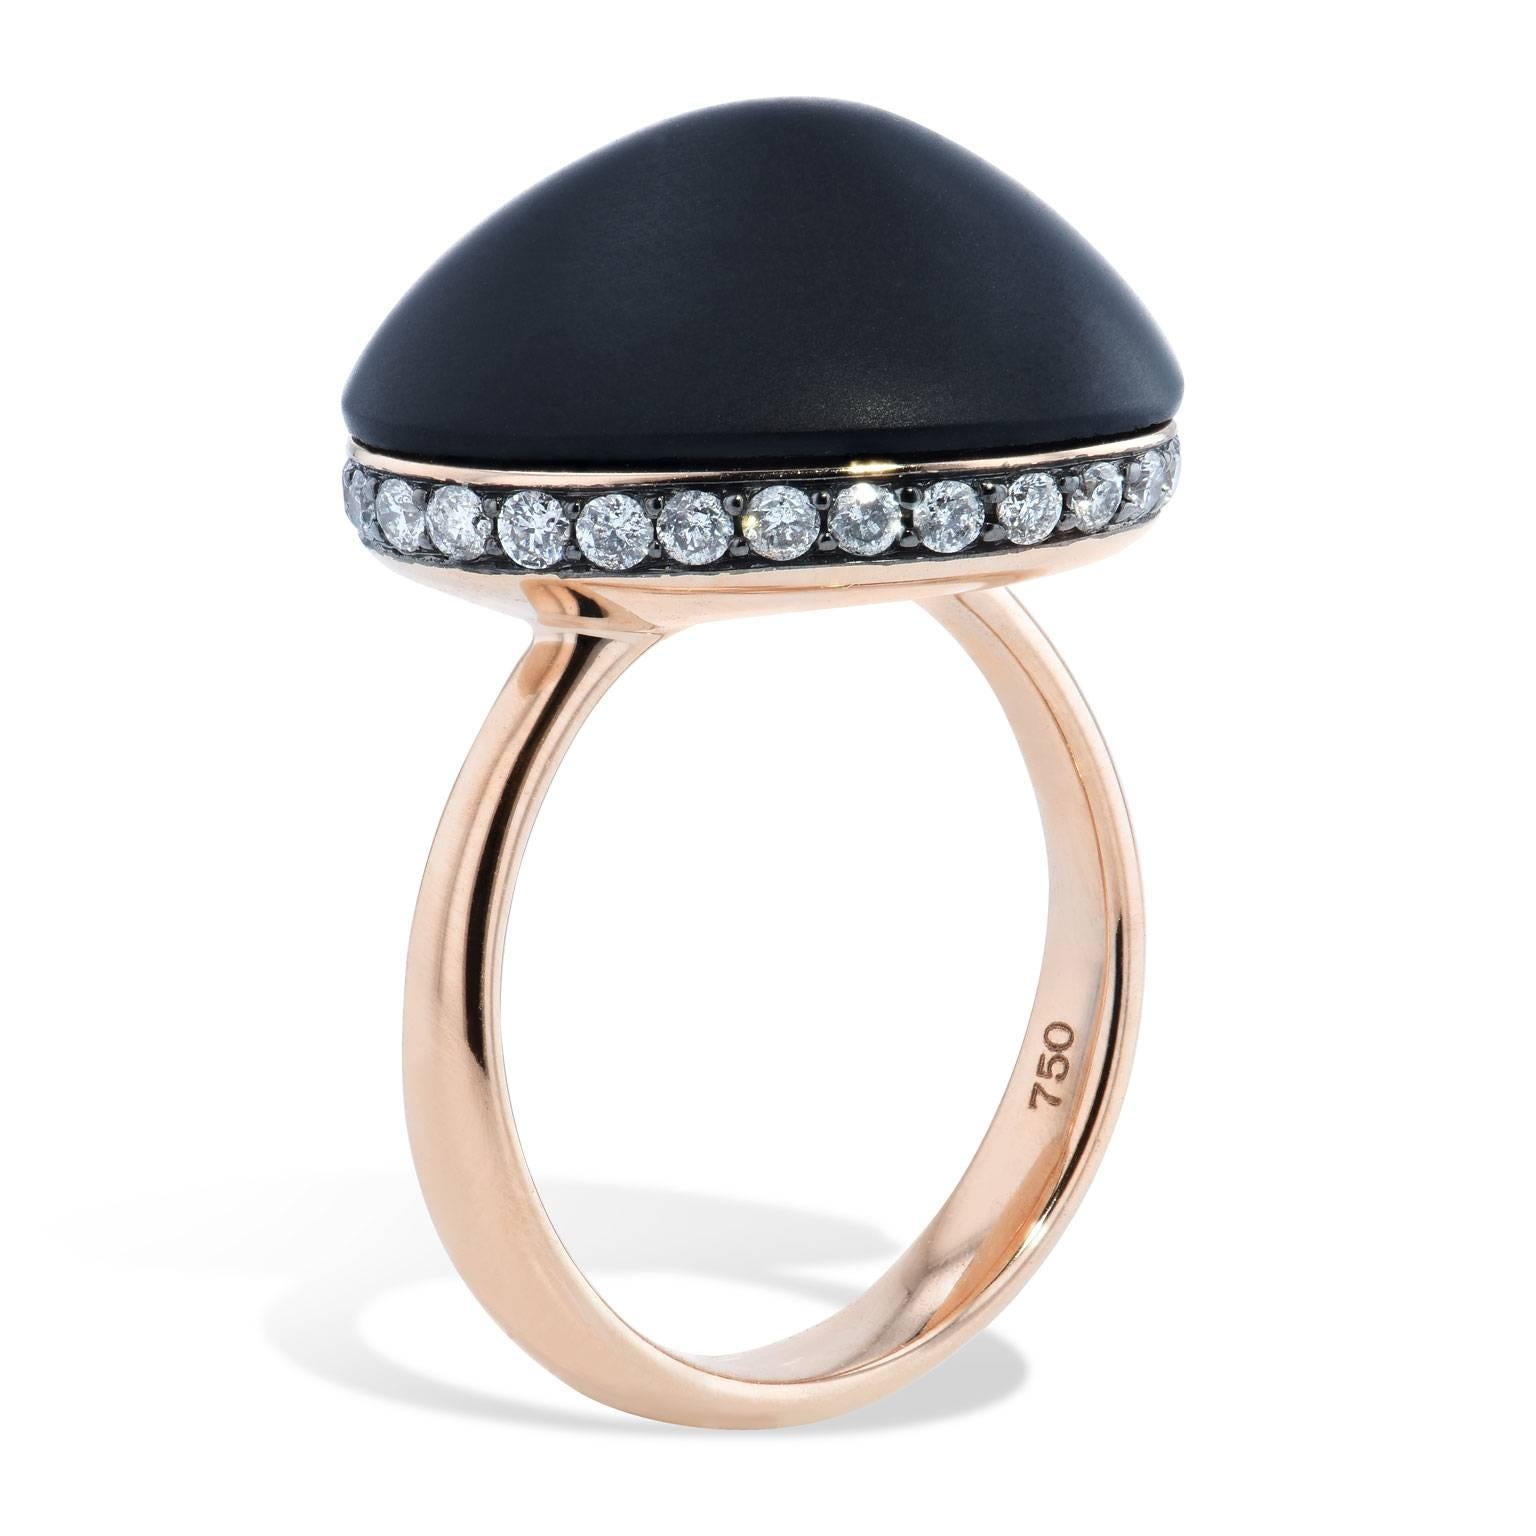 A 21.30 carat cabochon onyx (18 millimeter x 15.90 millimeter) is set at center and affixed to an 18 karat rose gold band and features 0.49 carat of pave-set diamond (G/VS).